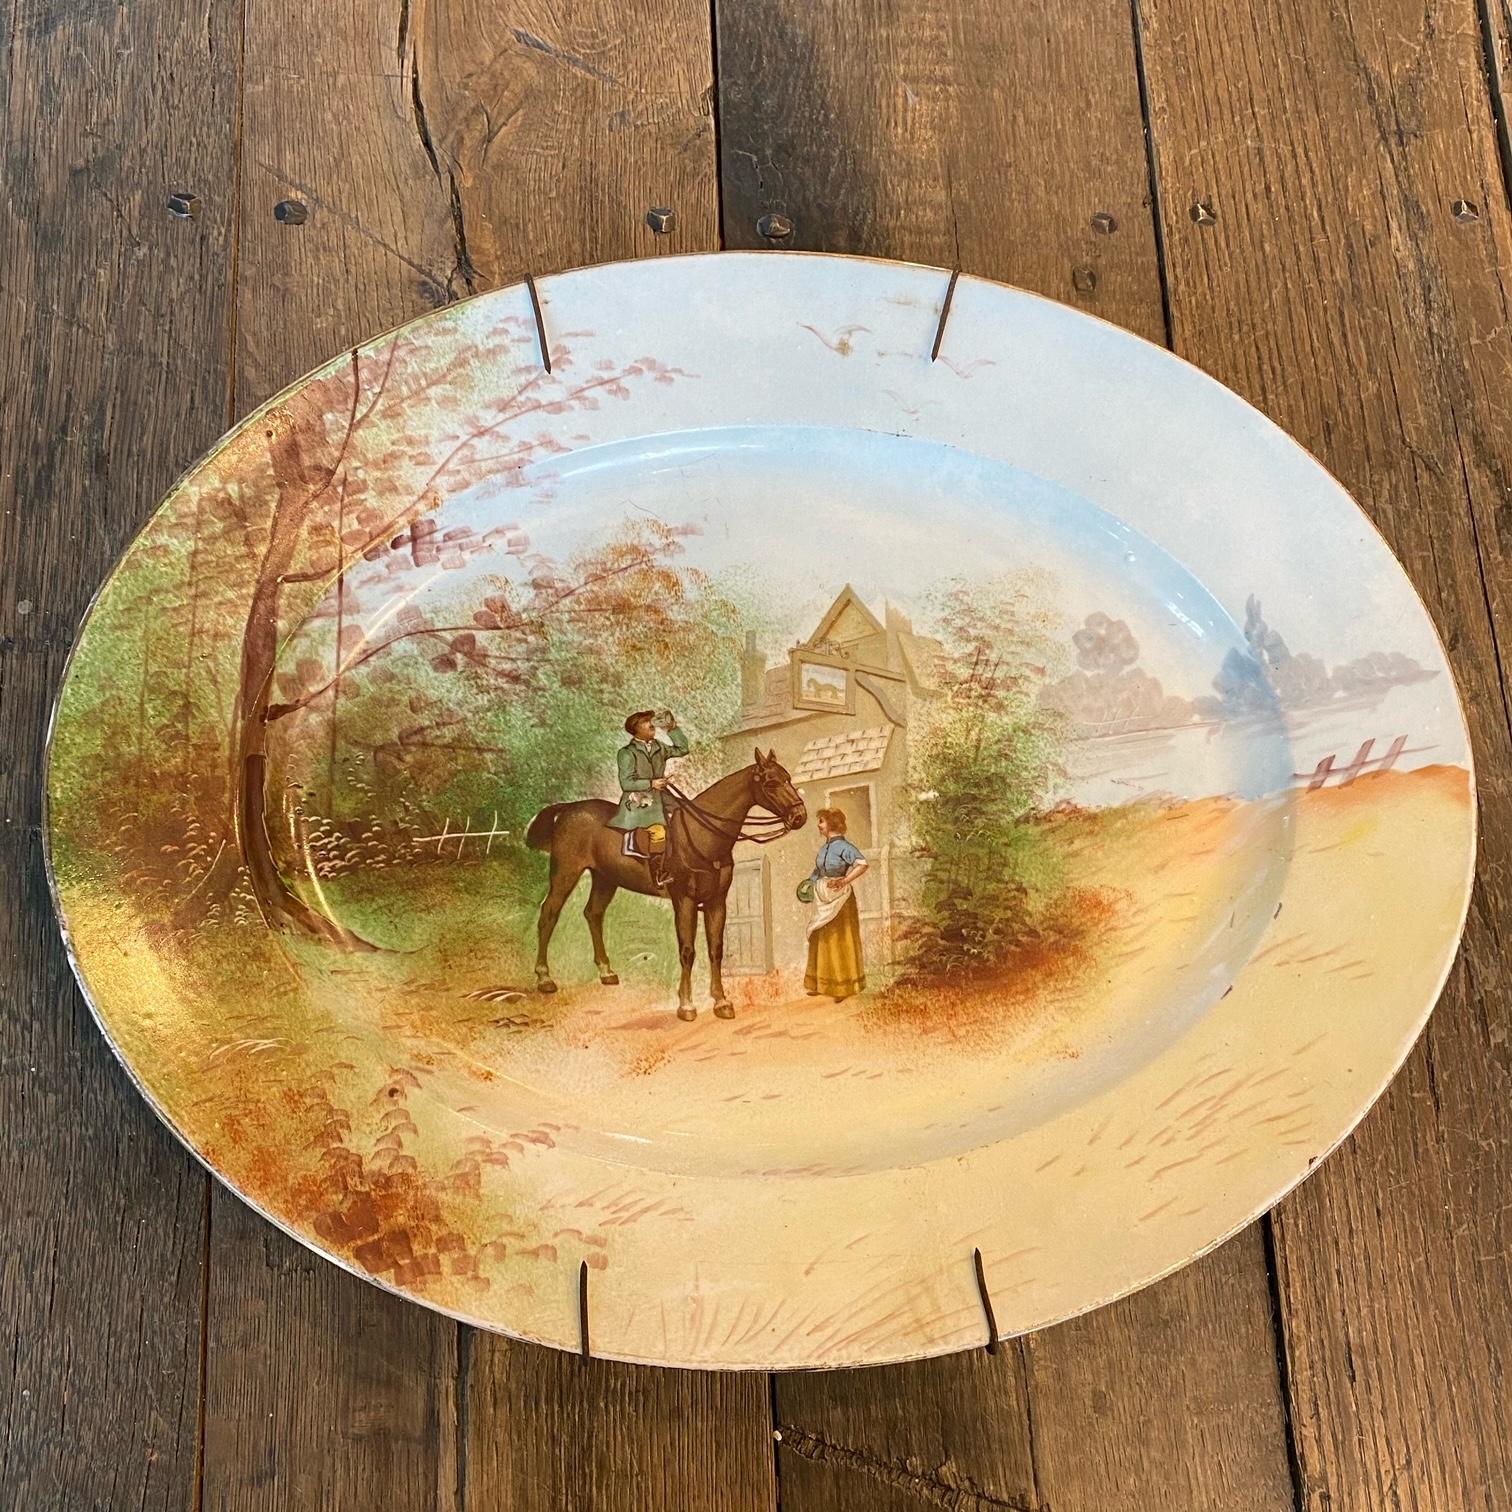 Beautiful pair of antique Limoges, France hunting equestrian hand painted platters that can be hung on a wall or used in entertaining. Original wall hanging wires remain and can be easily removed. Marked PL Limoges, France on the back. Excellent